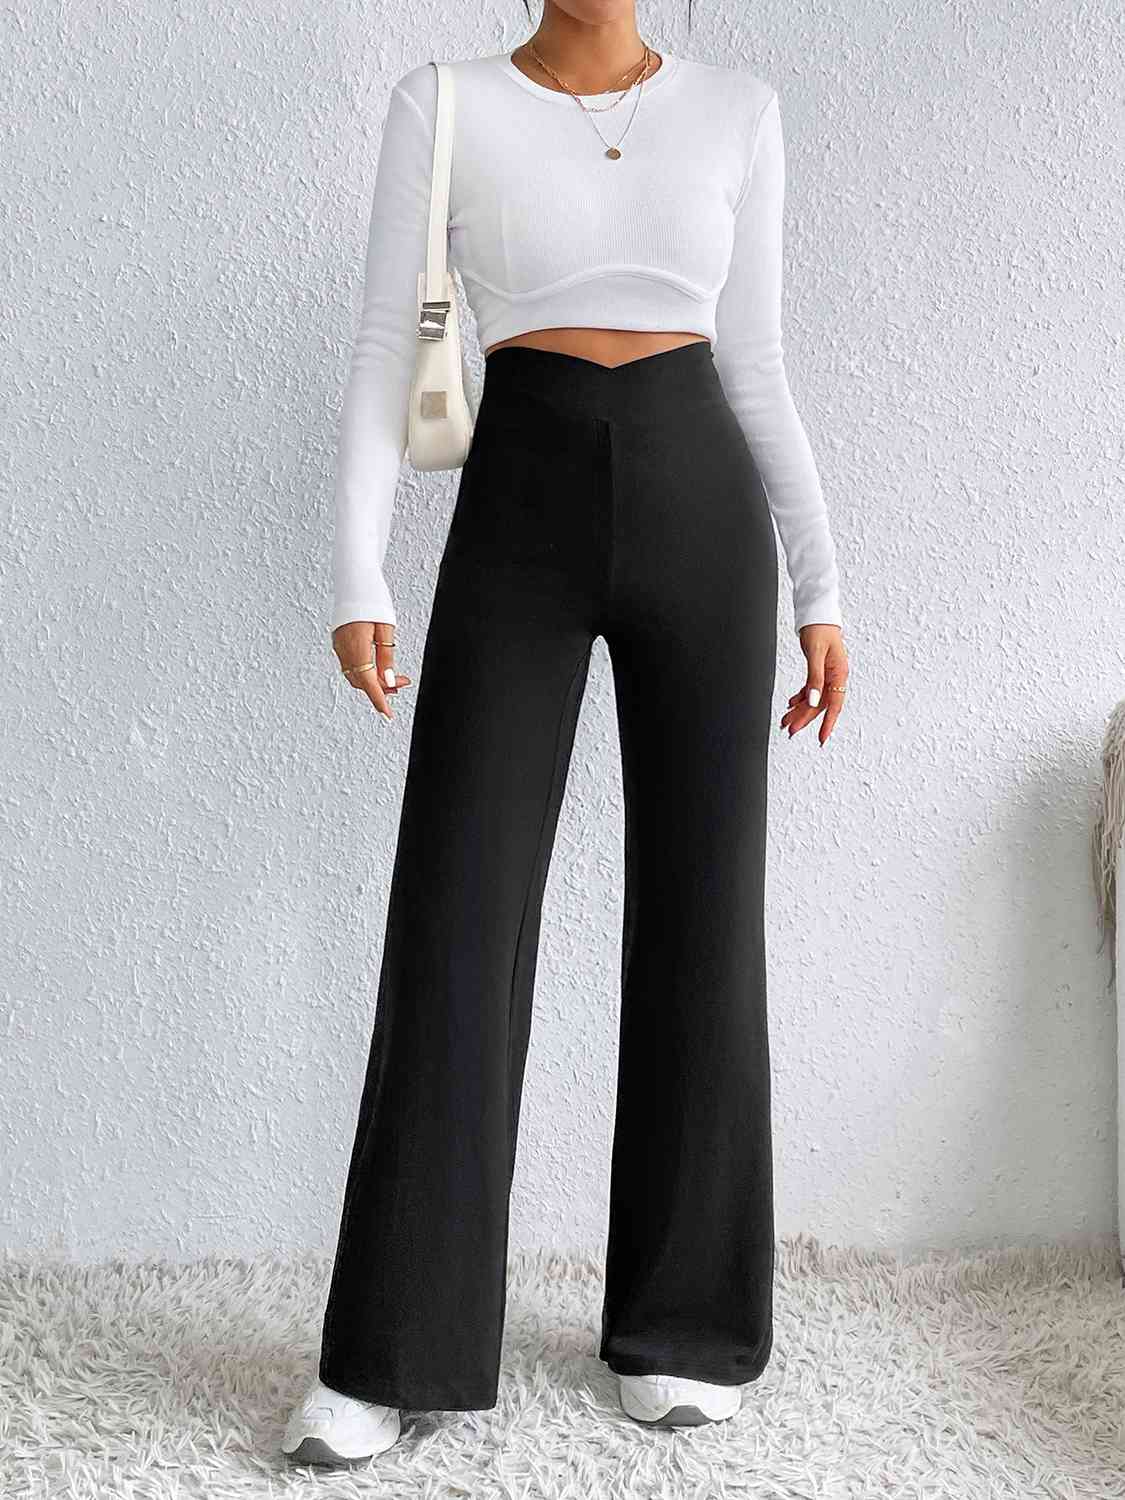 High Waist Flare Pants - Kawaii Stop - Chic Look, Classic Style, Comfortable, Confidence Boost, Easy Care, Everyday Elegance, Fashion Forward, Flare Pants, Hanny, High Waist, Opaque, Perfect Fit, Ship From Overseas, Soft Fabric, Sophisticated Style, Stretchy, Timeless, Versatile, Women's Fashion